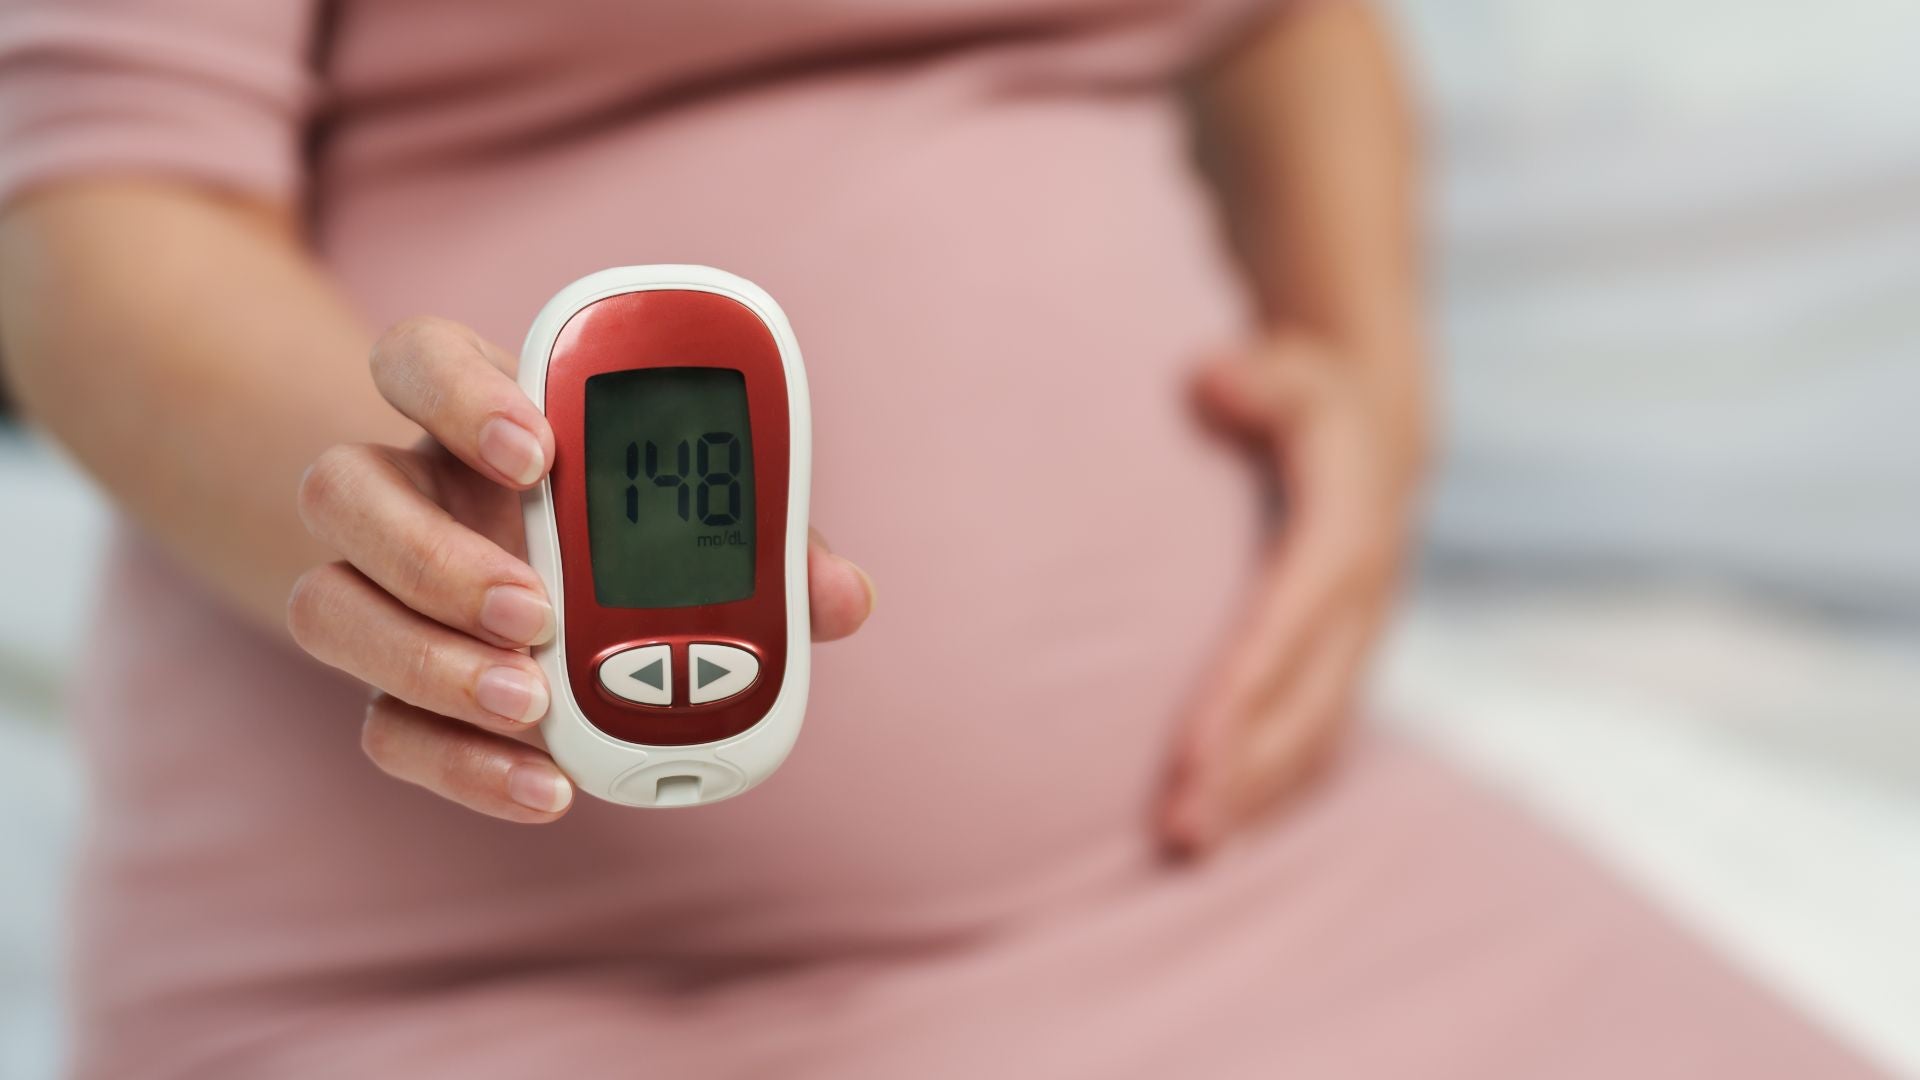 How to control diabetes during pregnancy?